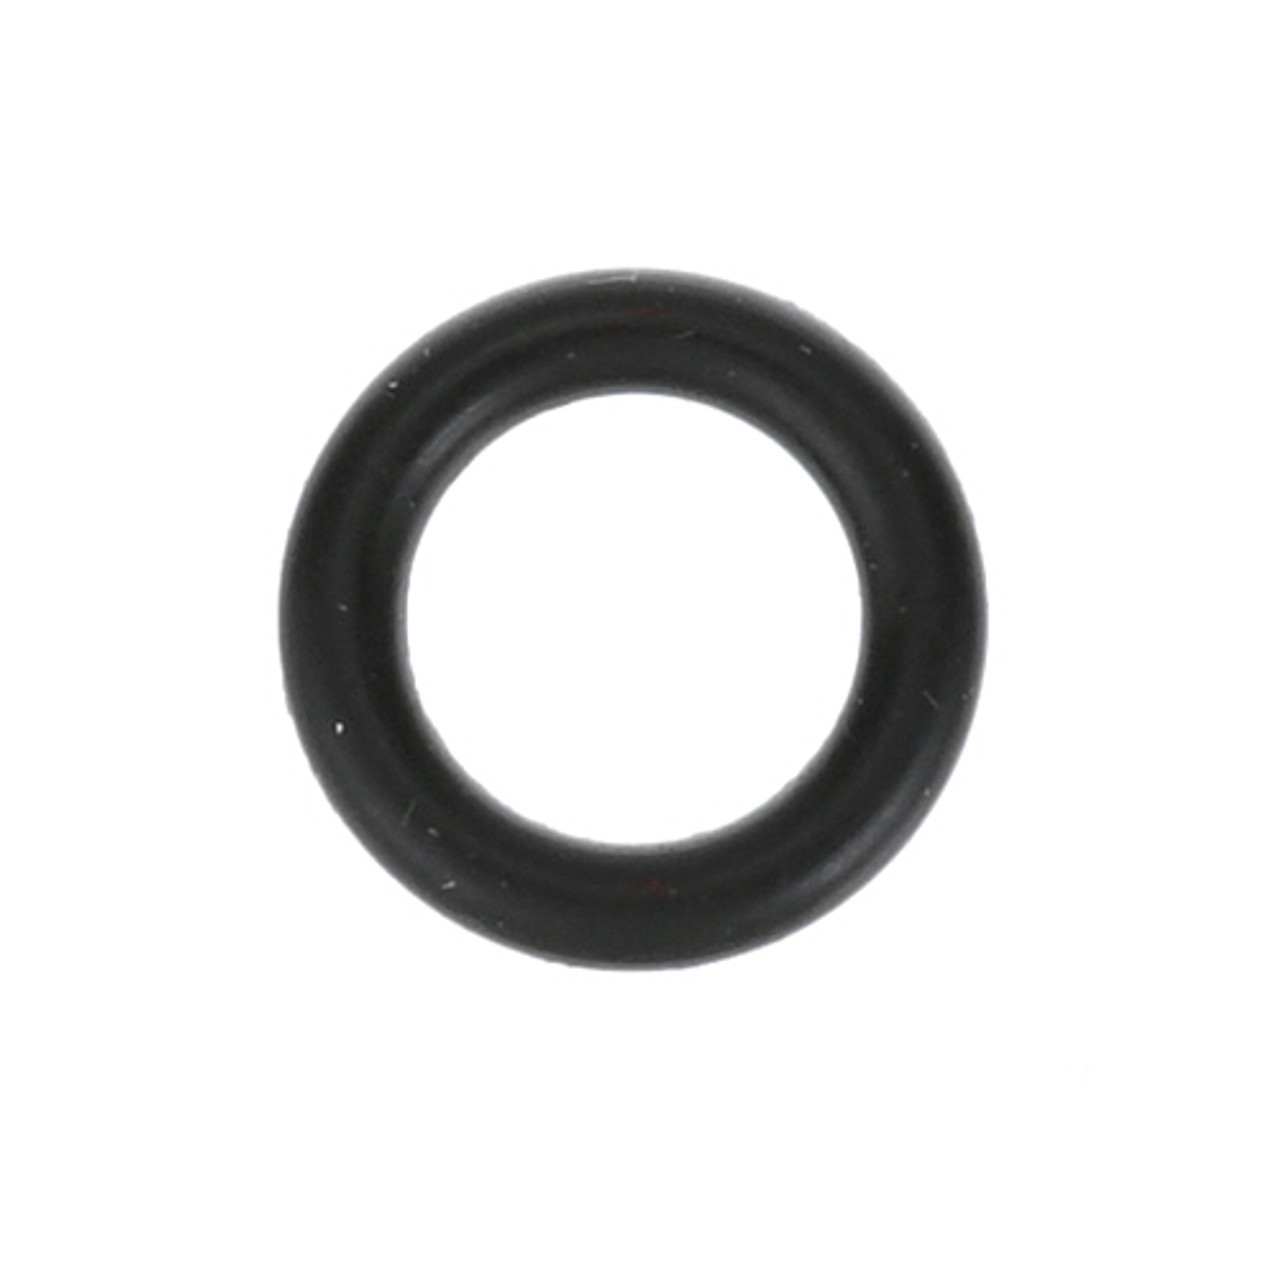 O-Ring 3/8" Id X 3/32" Width - Replacement Part For Server Products 82035